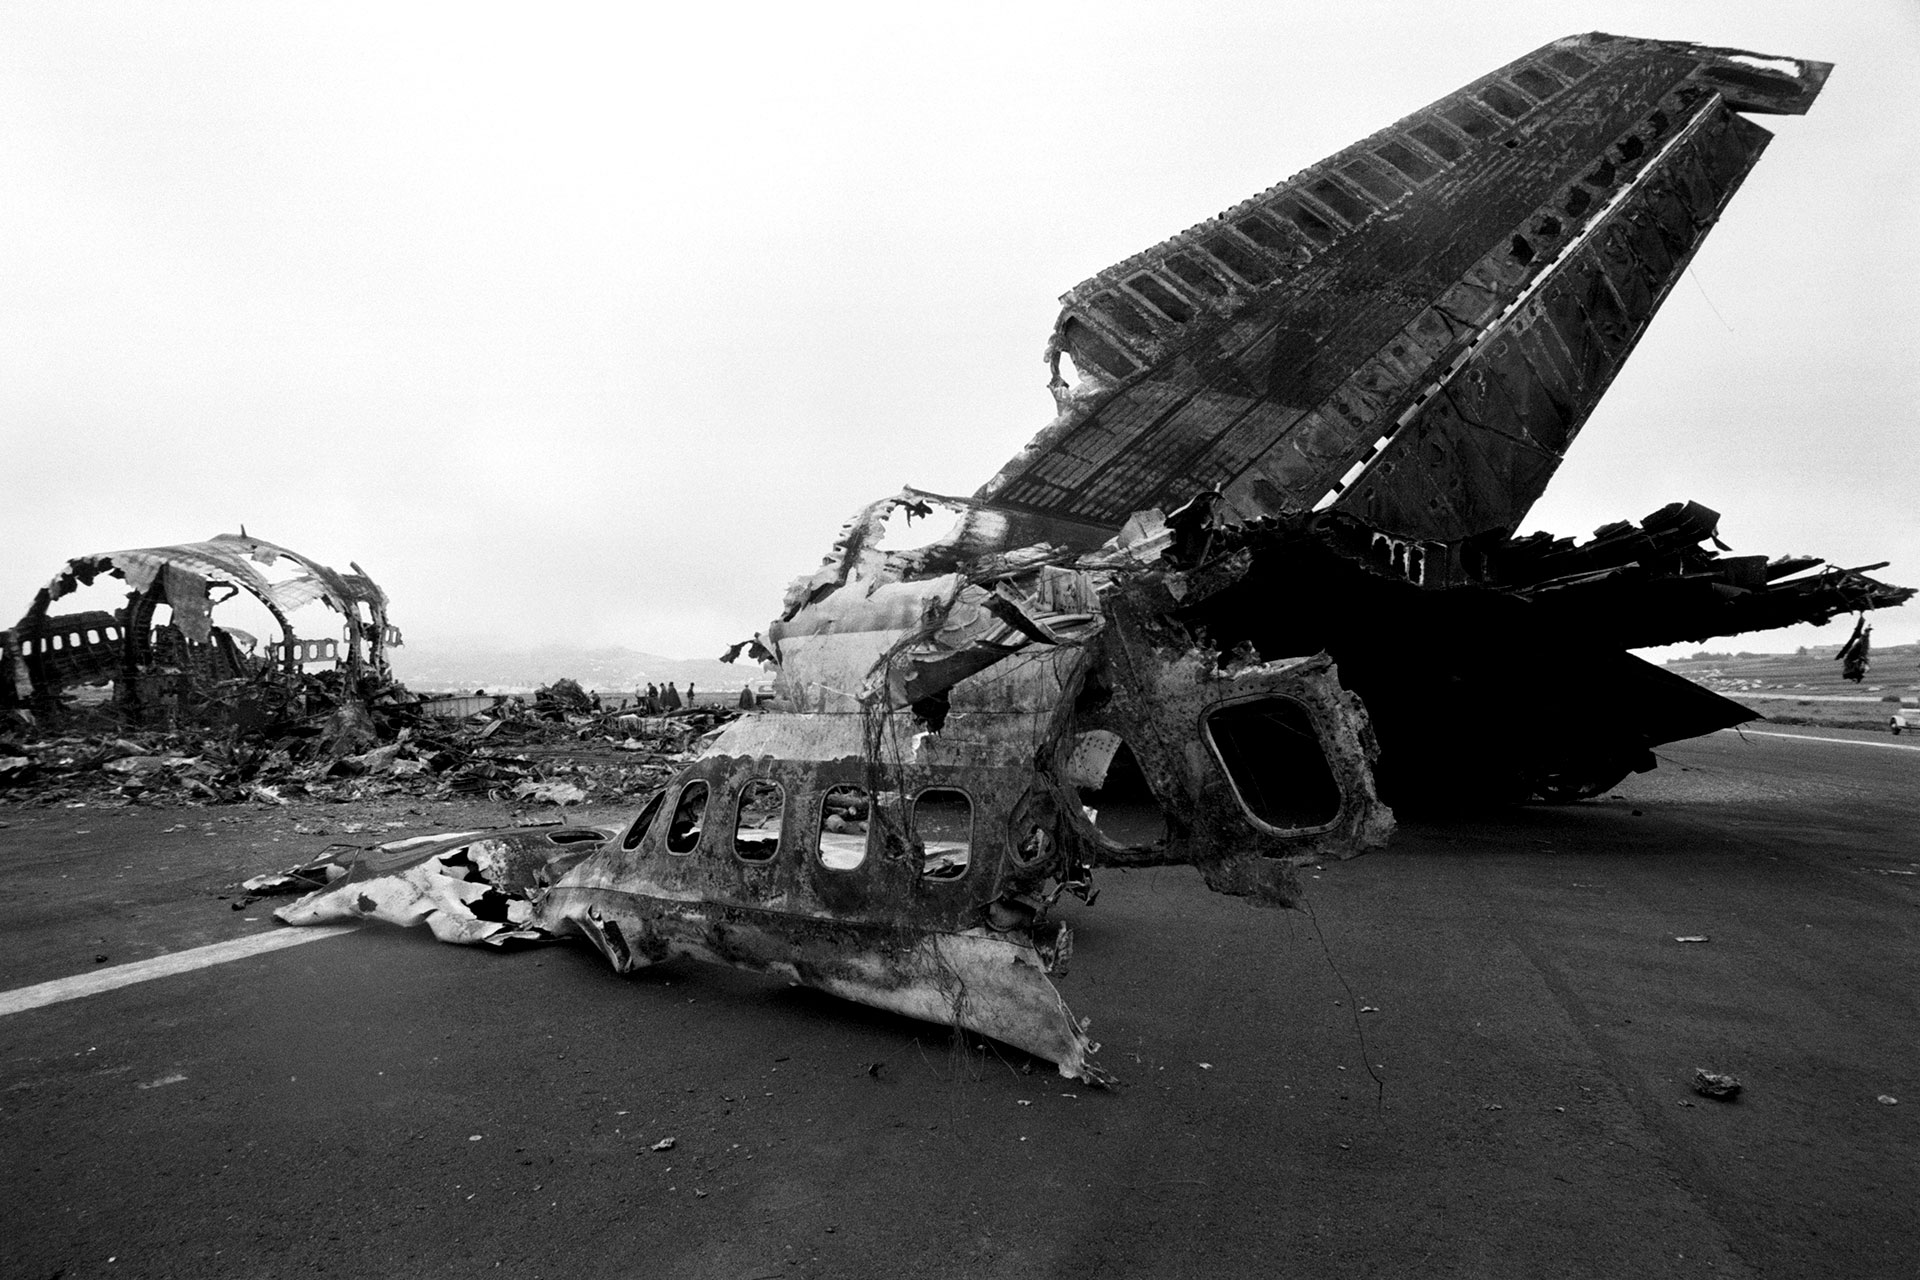 In 1977, two Boeing 747 planes collided on the runway at Tenerife Los Rodeos airport, killing 583 people, making it the worst accident in aviation history.  Tony Comiti/Sygma via Getty Images/Archive